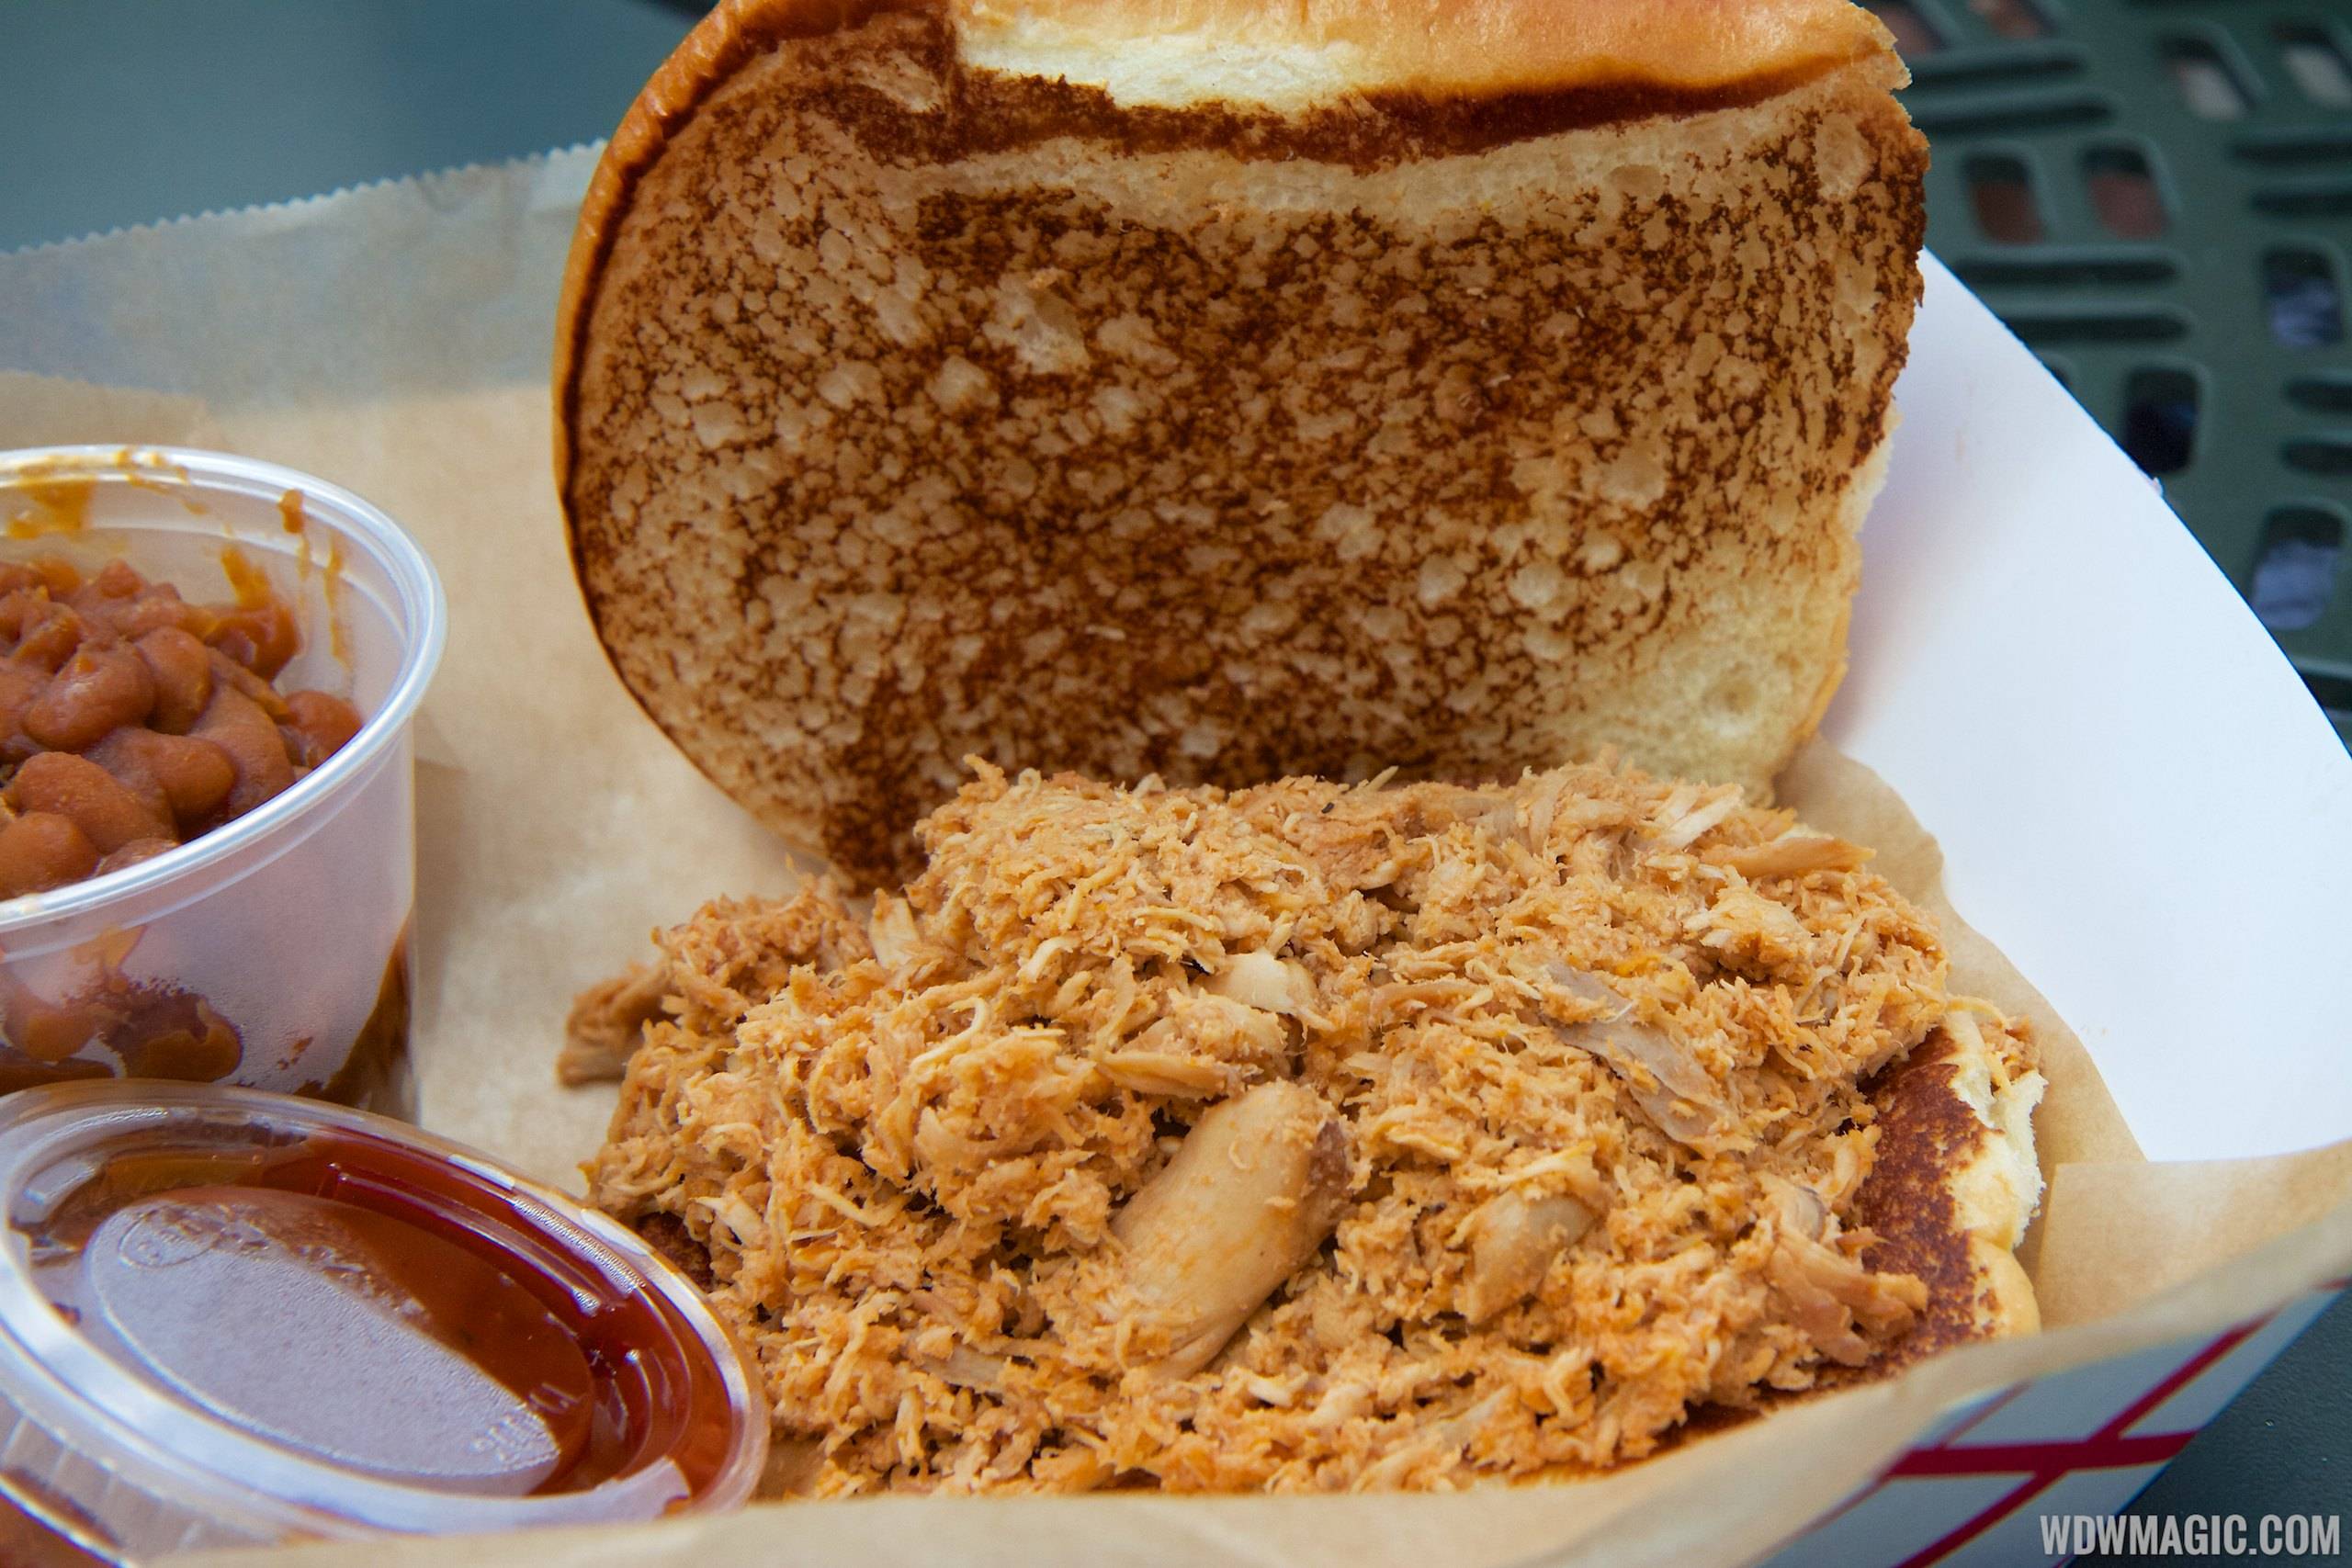 The Smokehouse - Pulled chicken sandwich